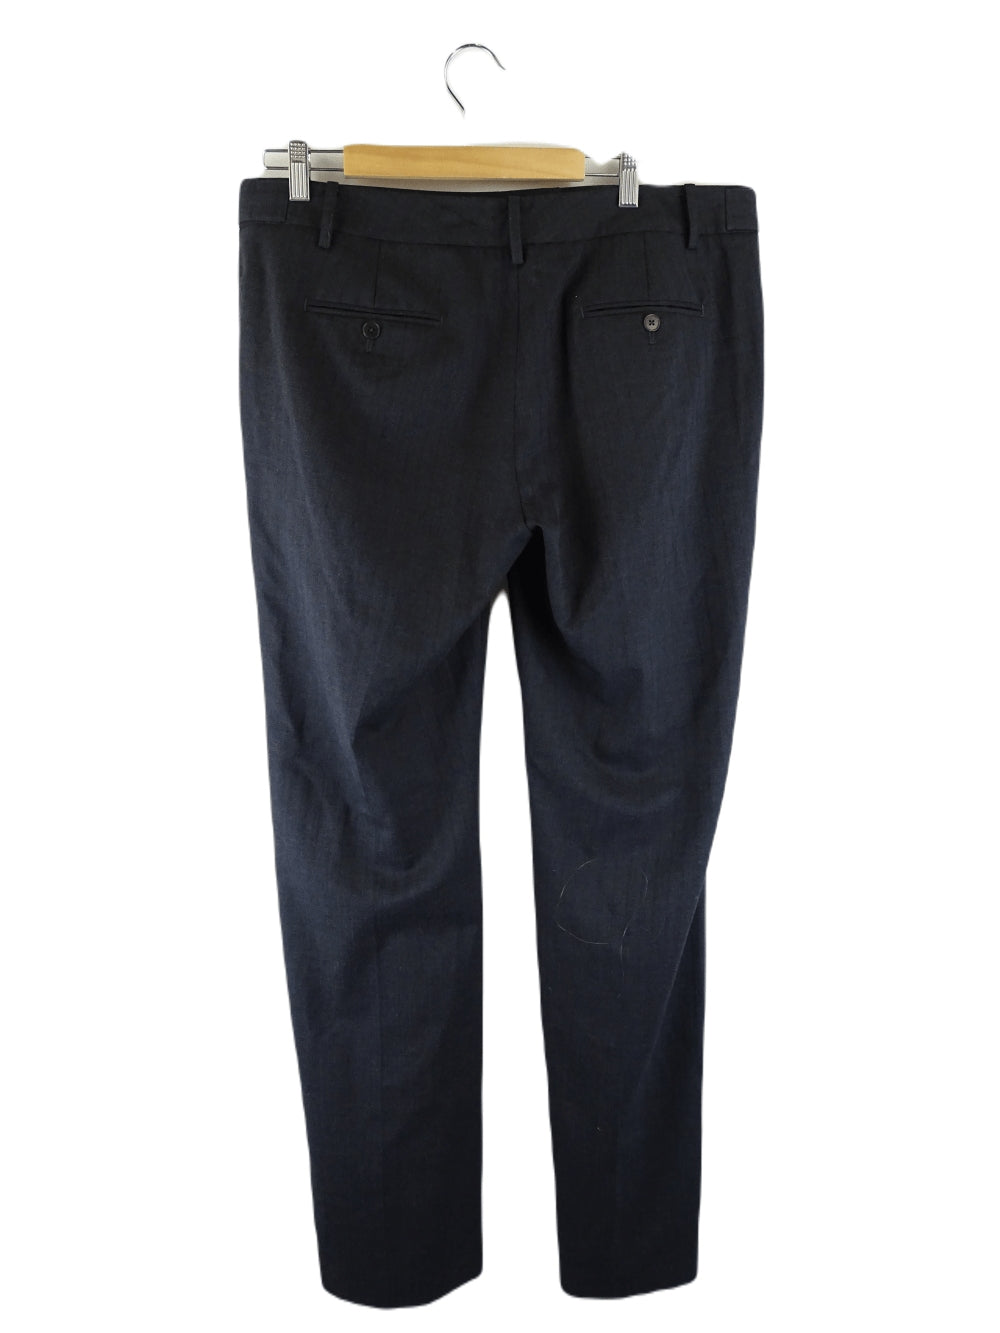 Country Road Work Pants 16